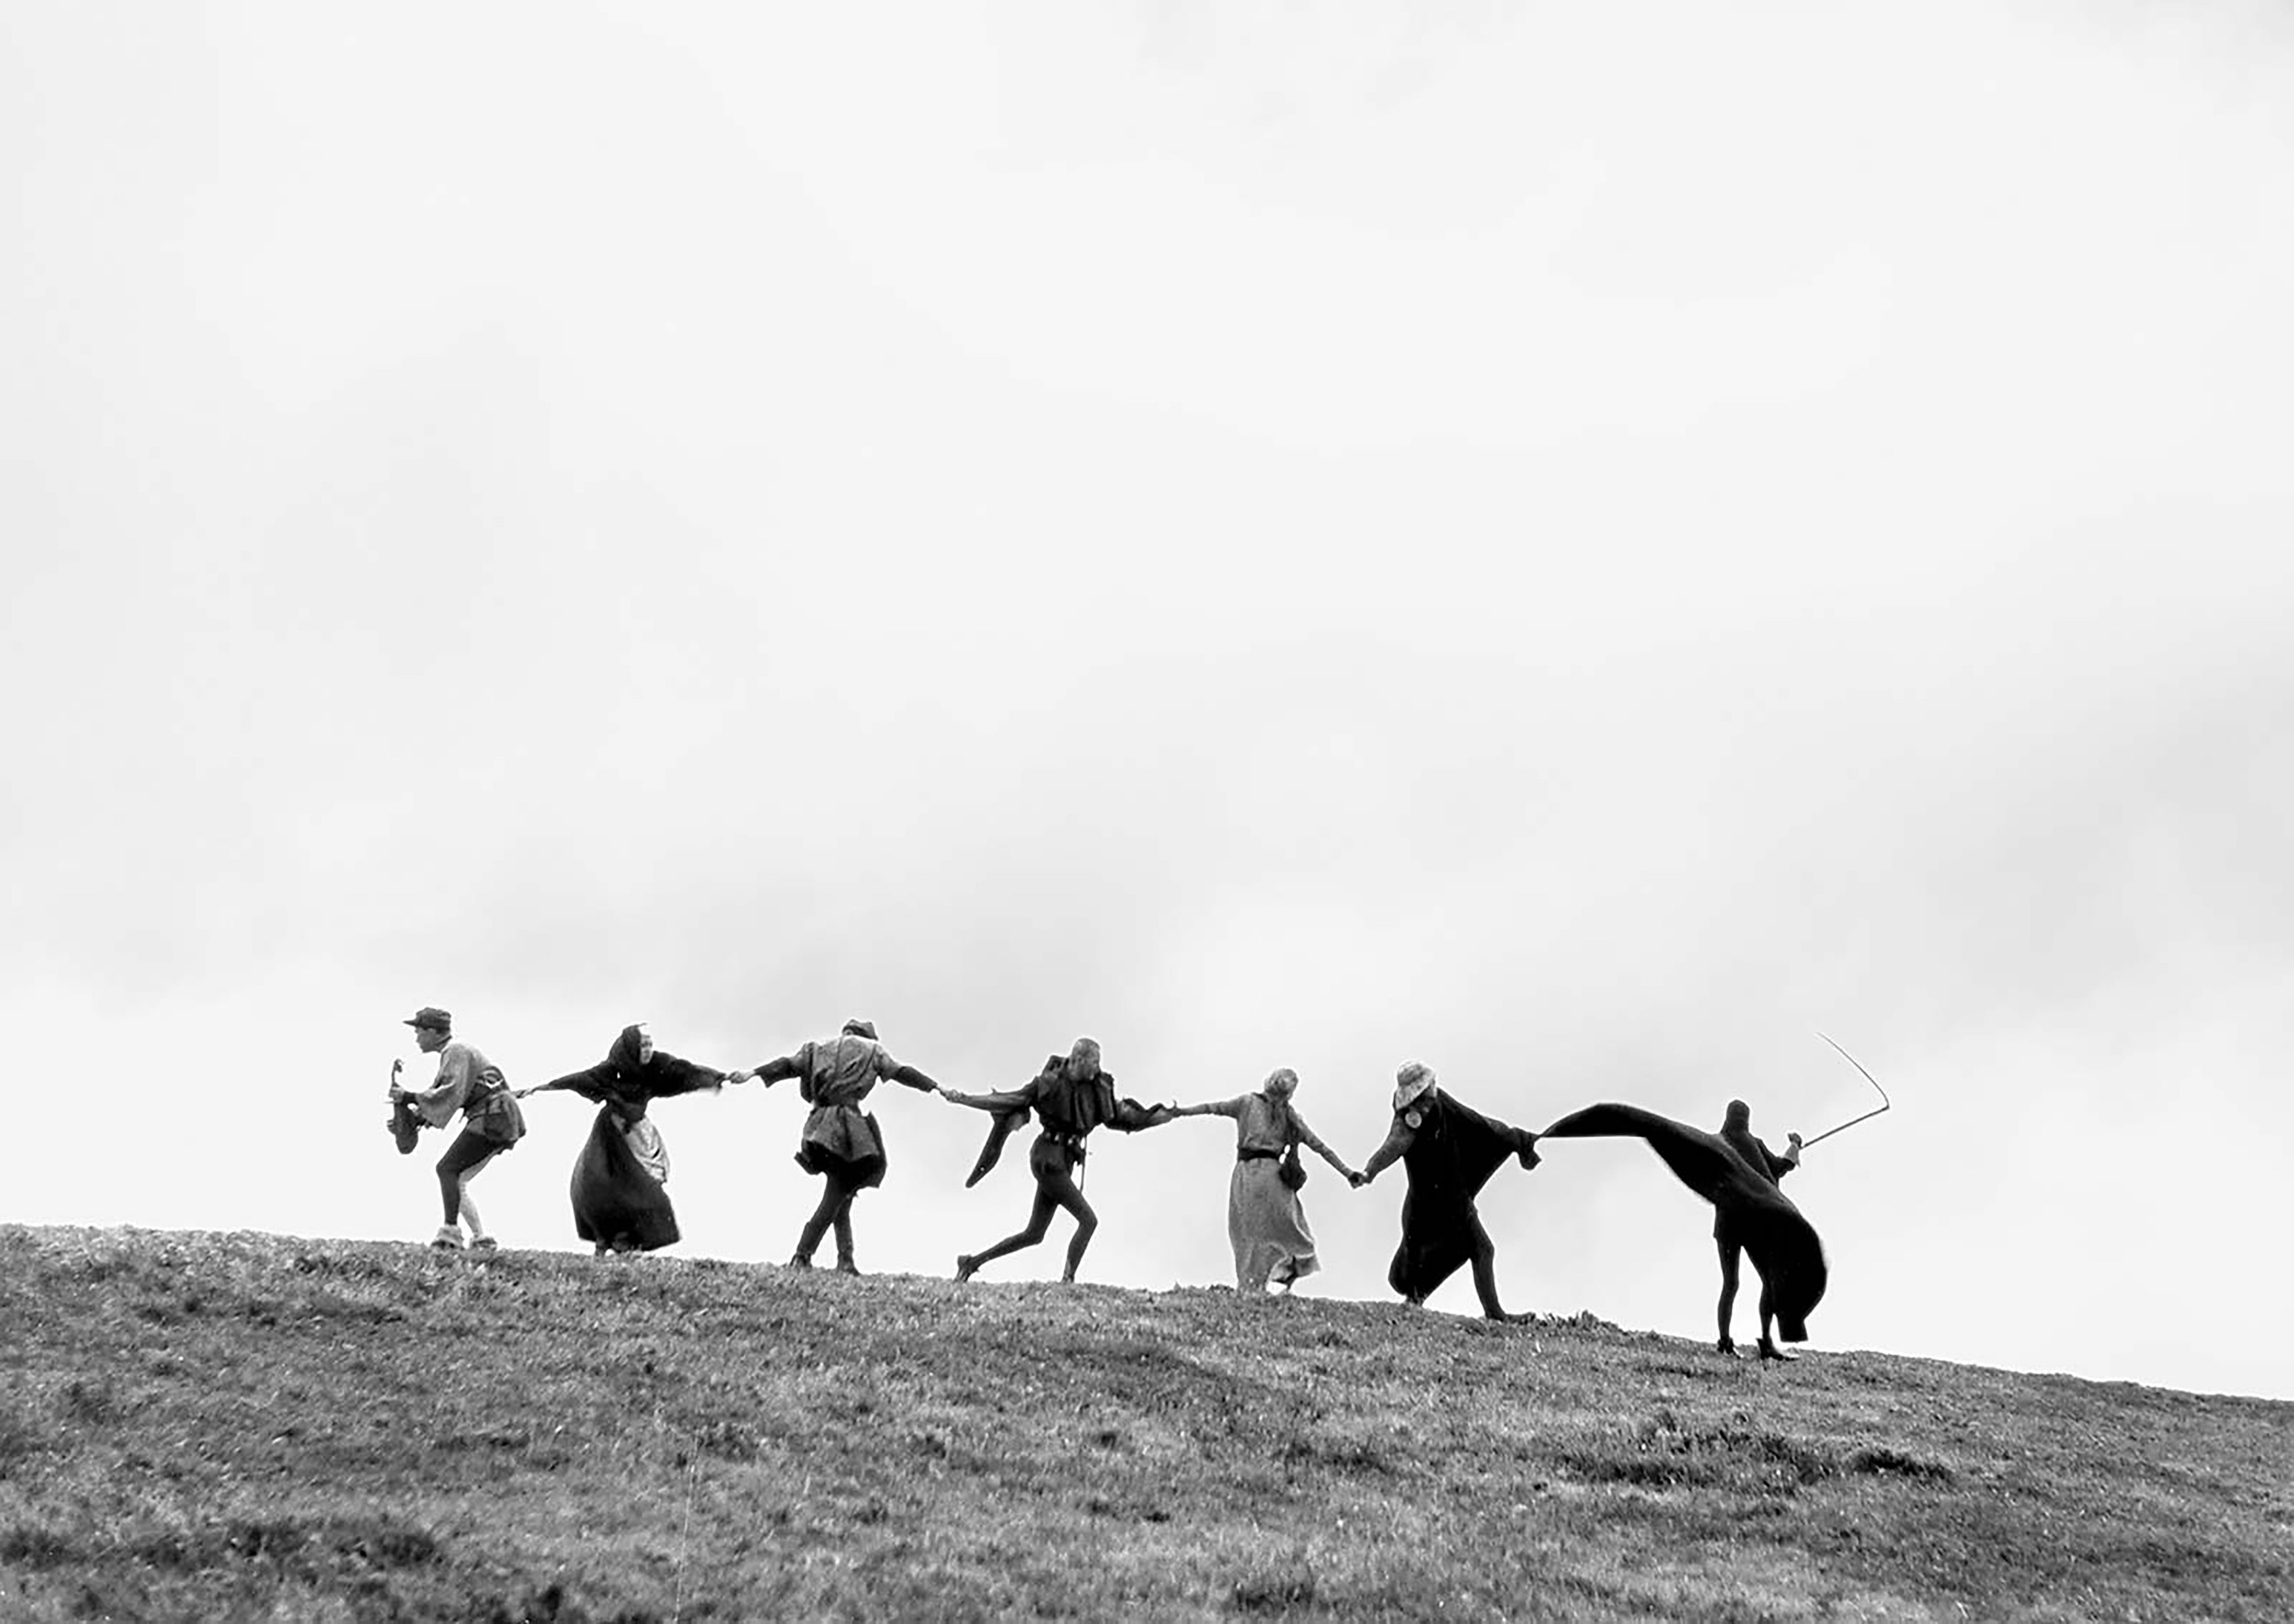 Characters in Ingmar Bergman’s ‘The Seventh Seal’ find a sort of salvation through sundry acts of selflessness. 